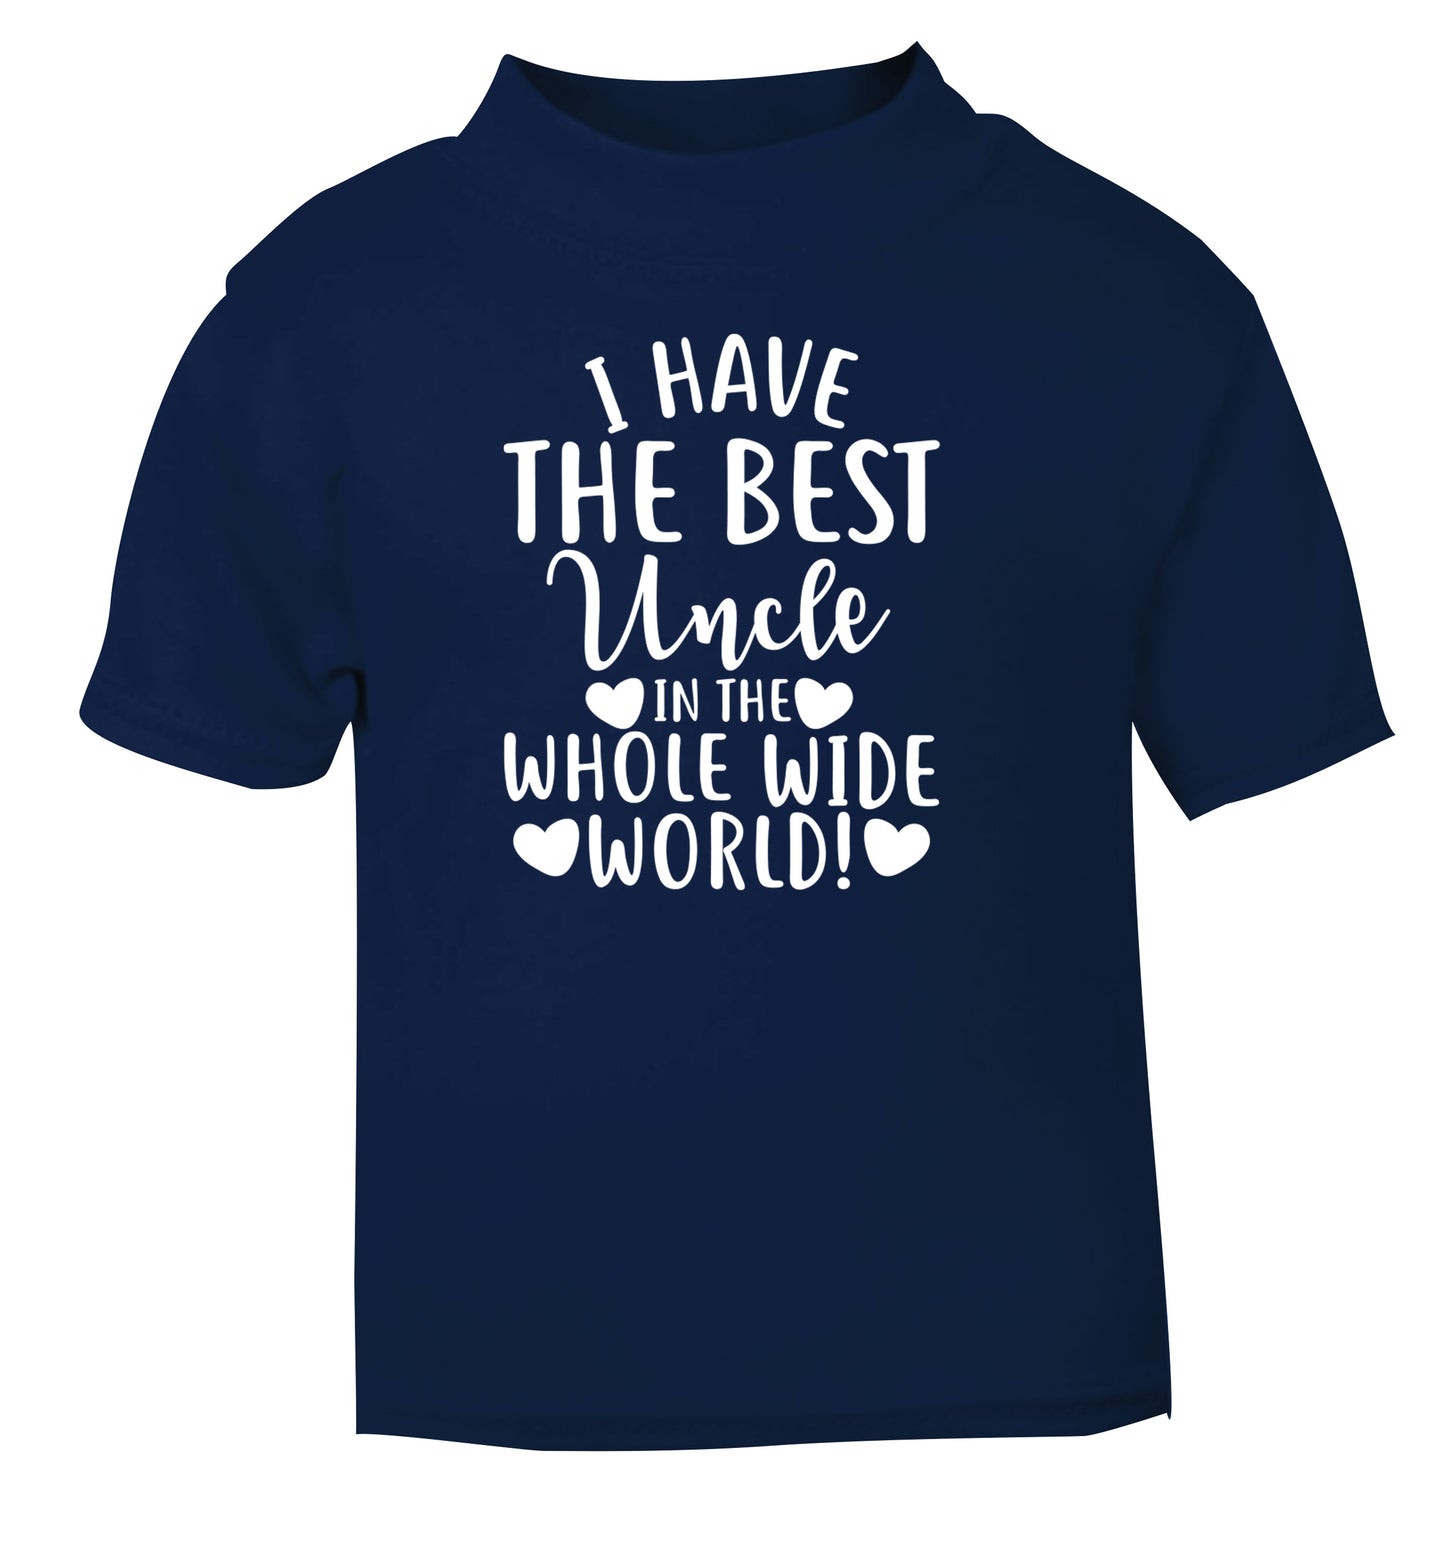 I have the best uncle in the whole wide world! navy Baby Toddler Tshirt 2 Years